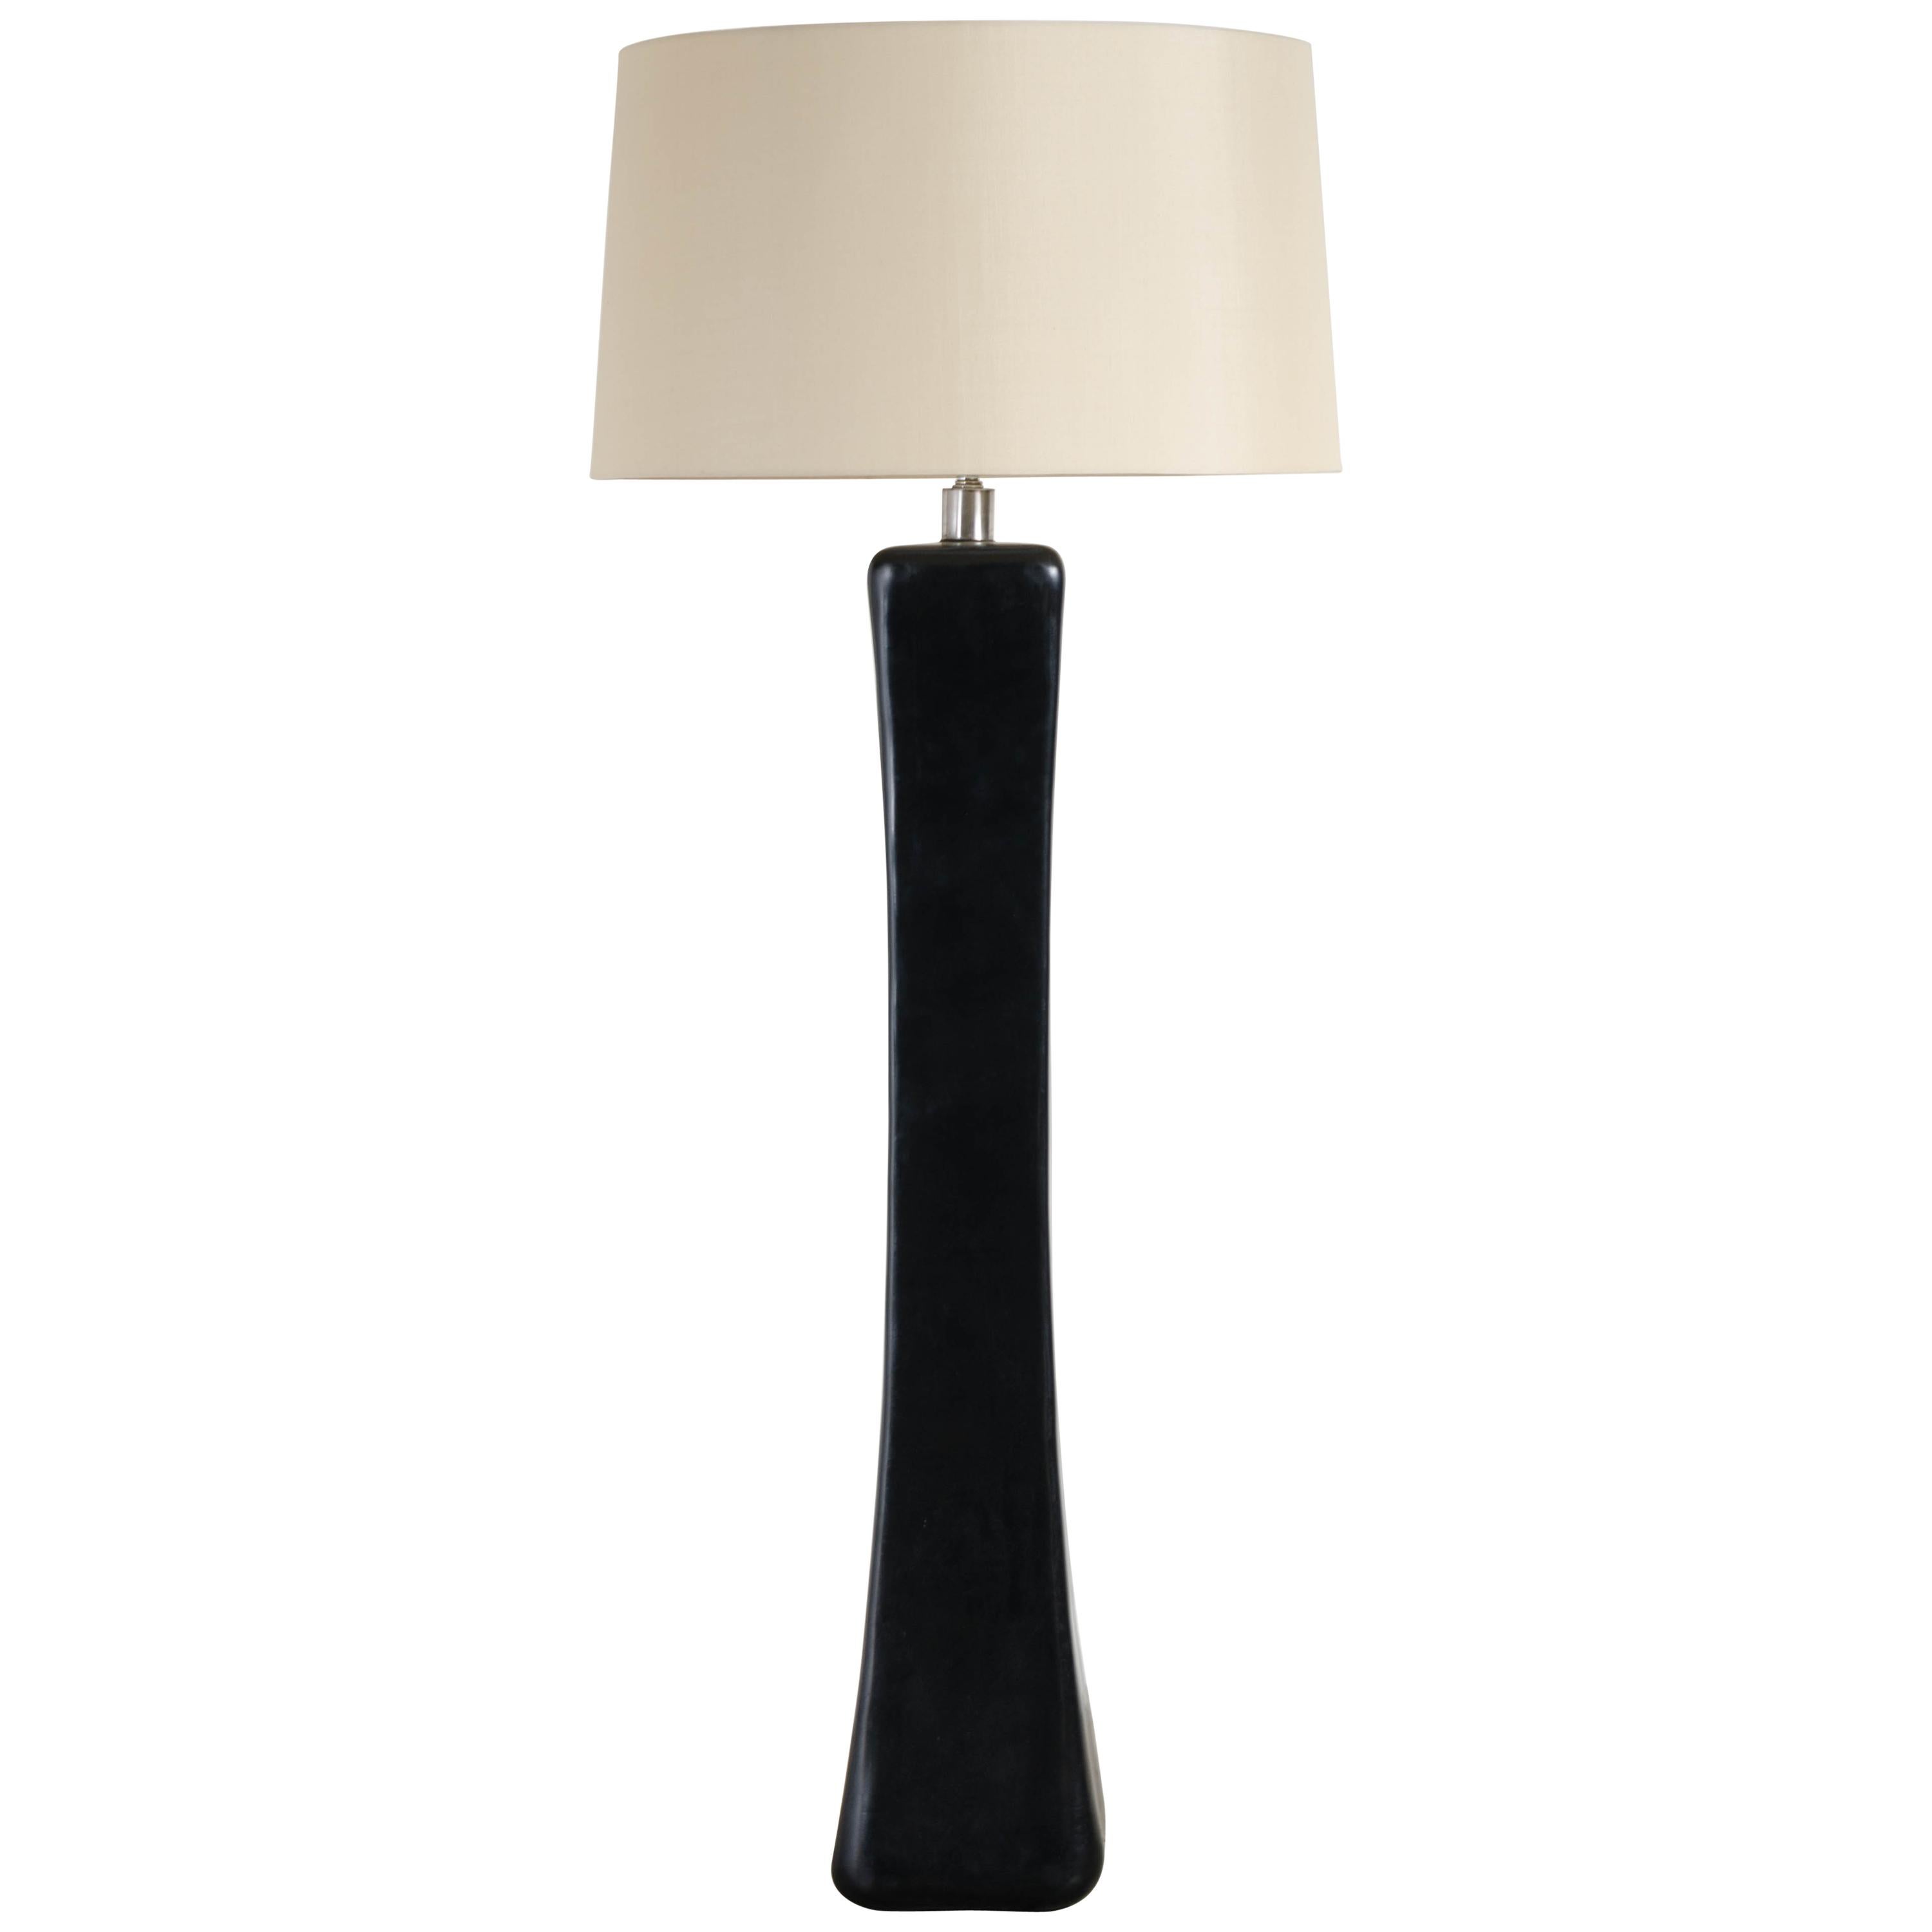 Pillow Floor Lamp, Black Lacquer by Robert Kuo, Handmade, Limited Edition